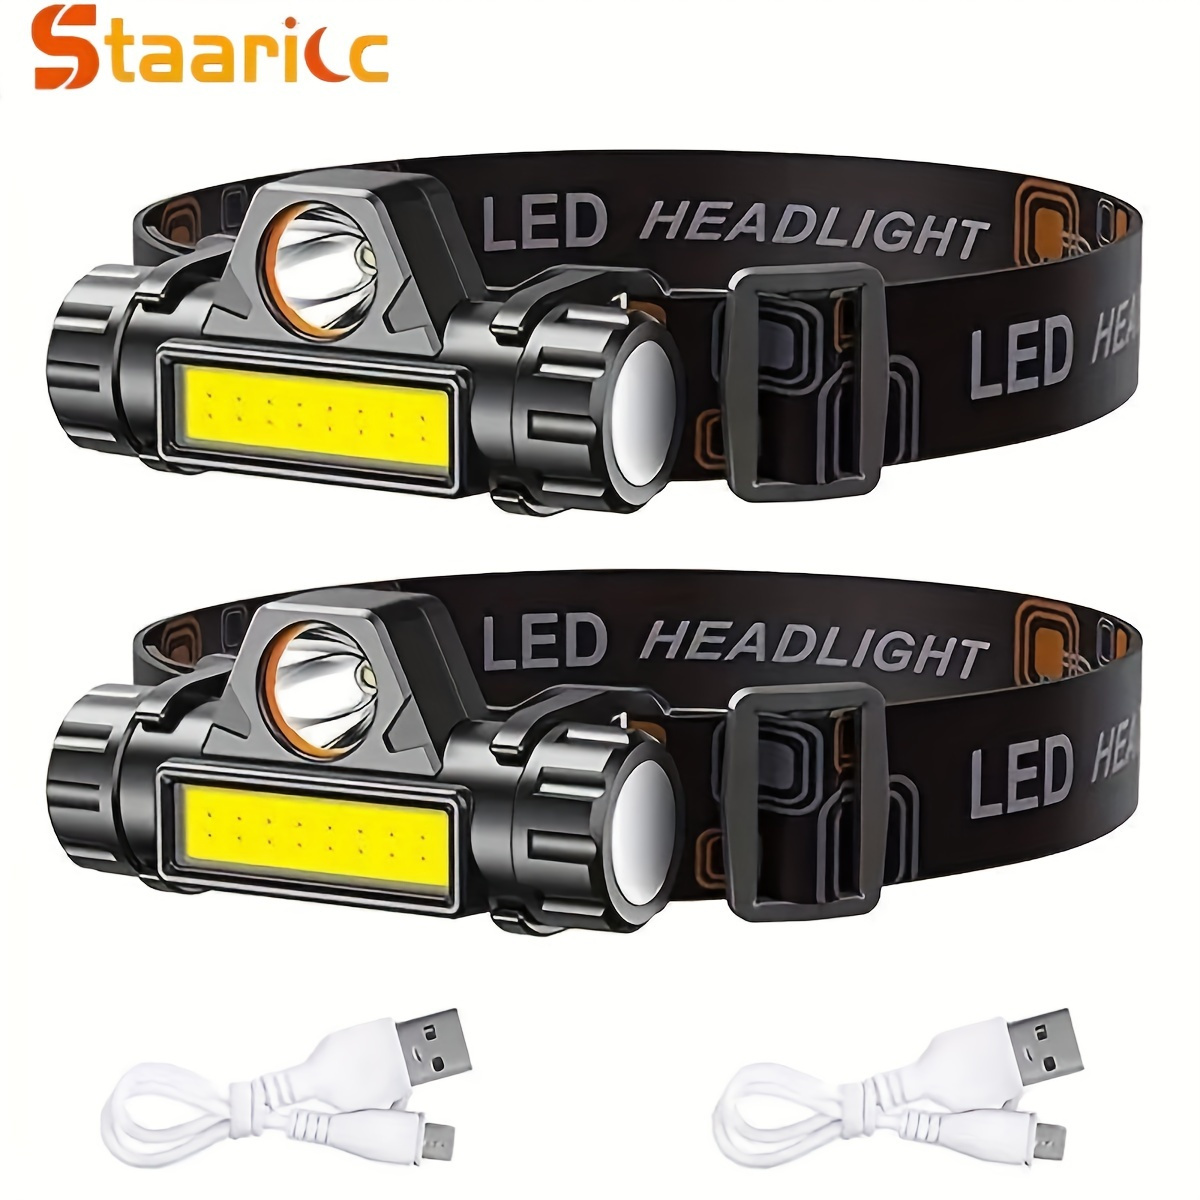 

Staaricc Led Headlamp, Usb Rechargeable Cob Head Lamp, With Magnetic Lightweight Flashlight, Adjustable Headband Headlight For Outdoor Camping Running Fishing Emergency